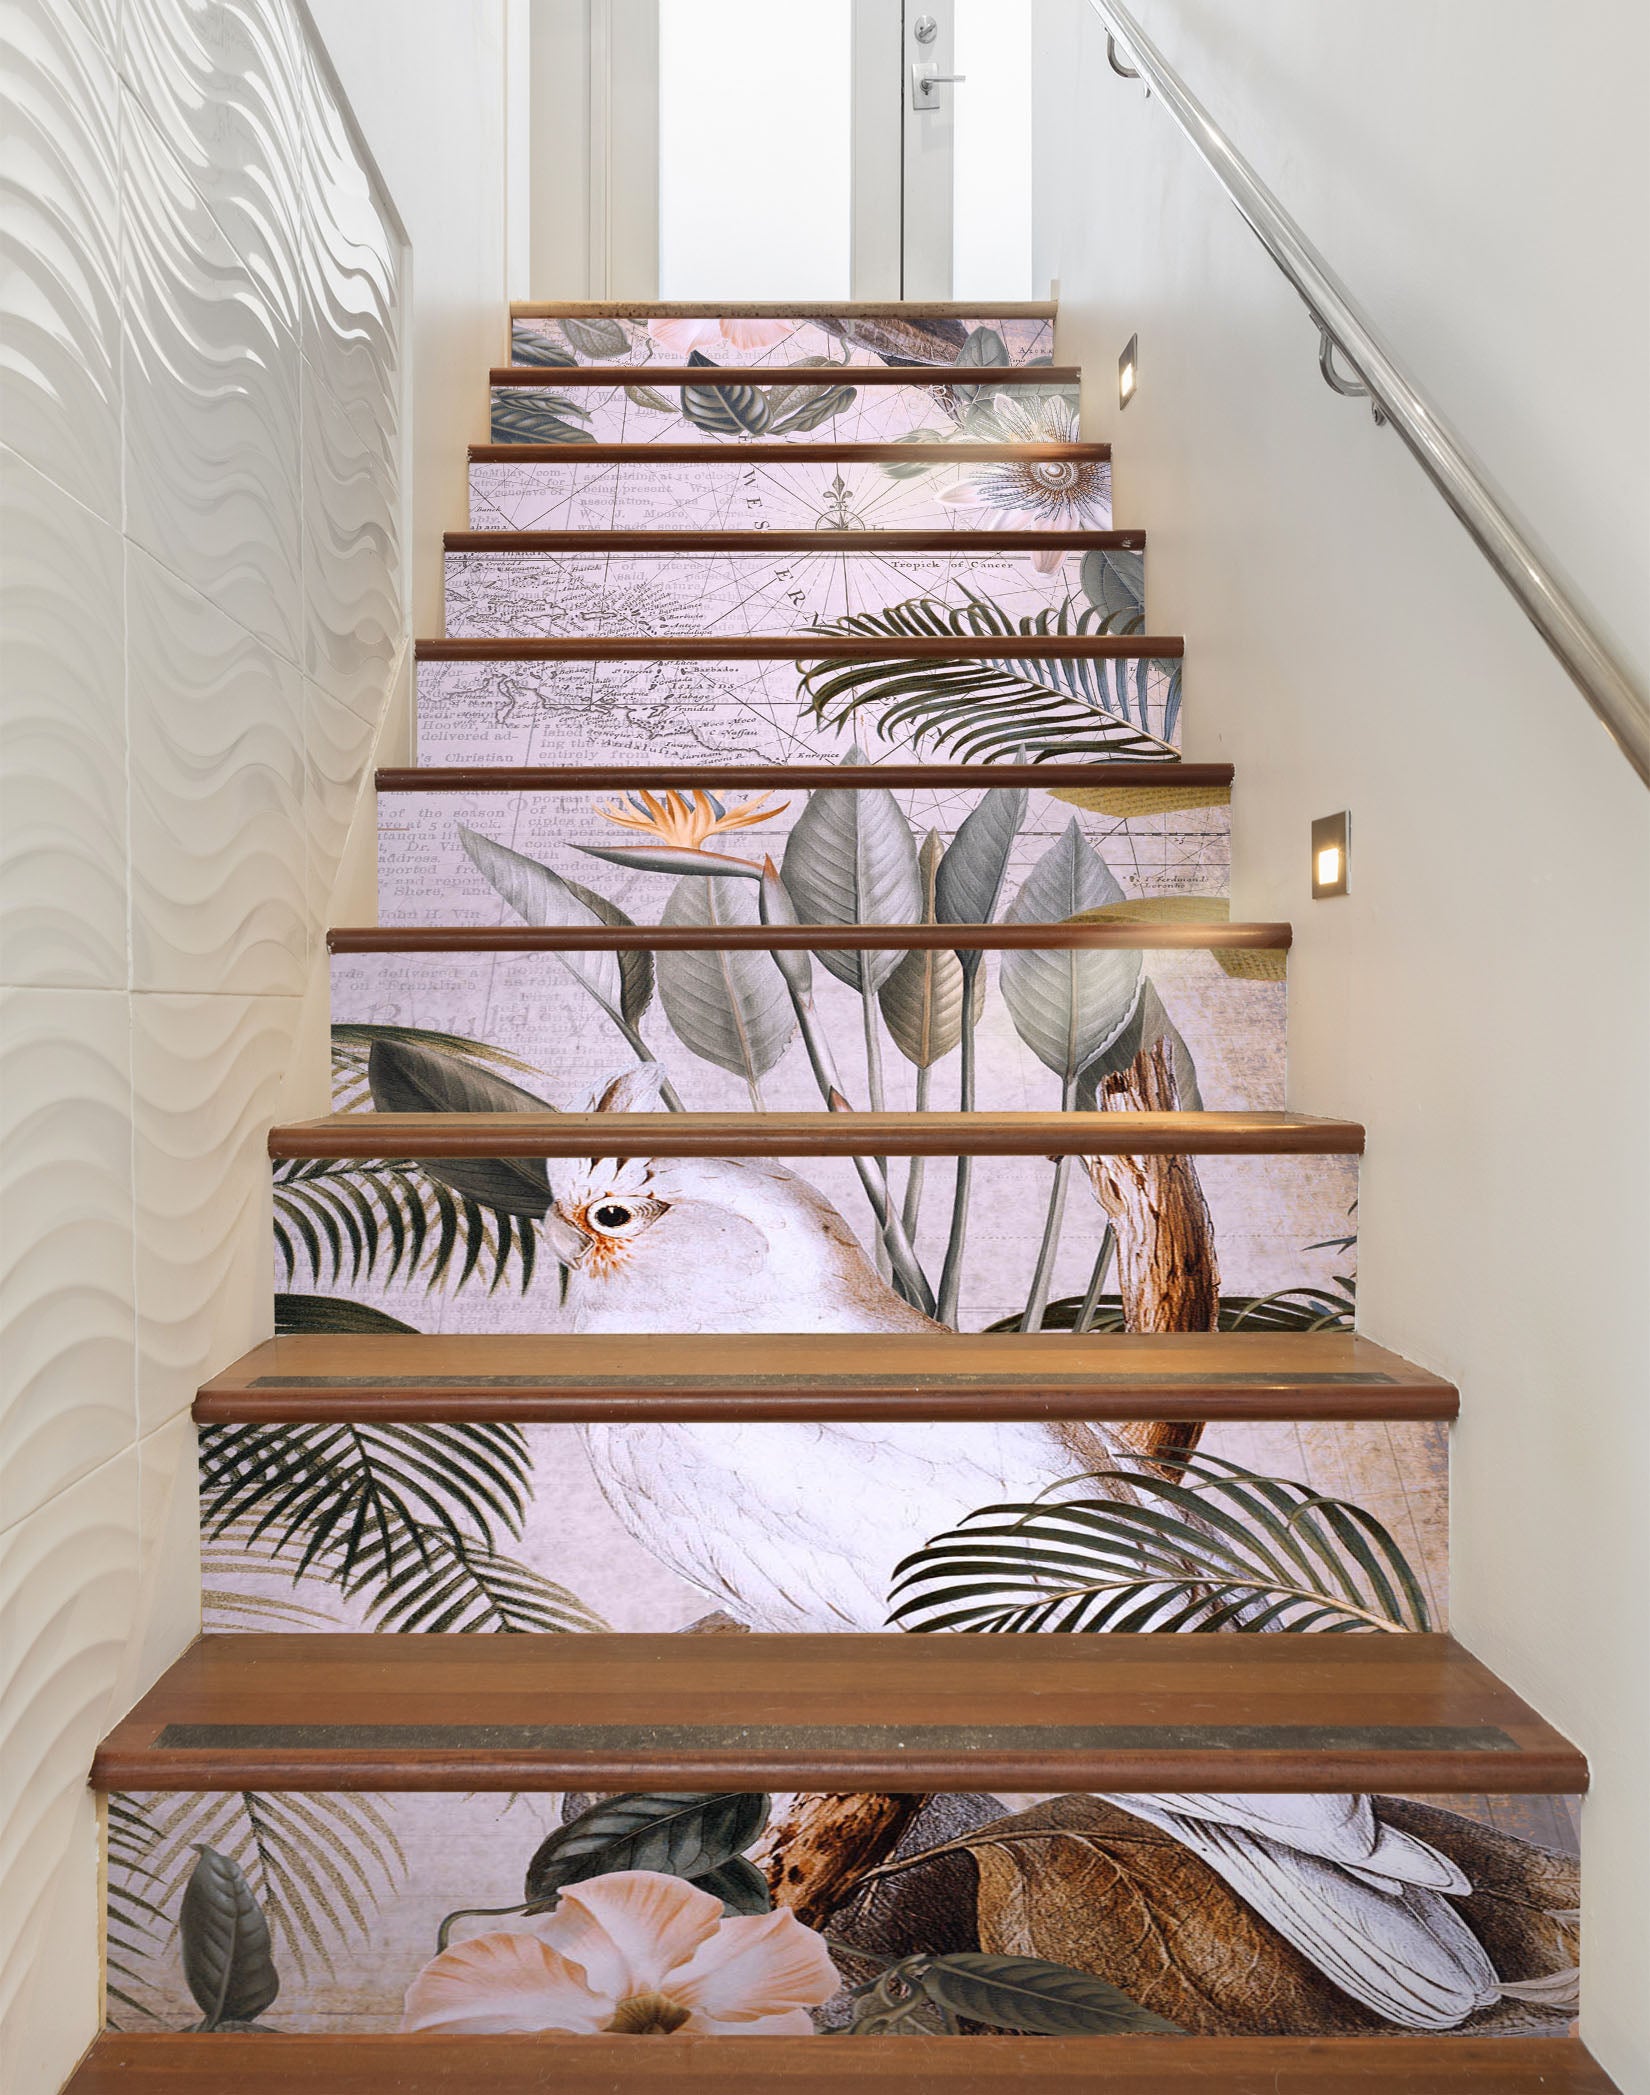 3D Parrot Tree 11046 Andrea Haase Stair Risers